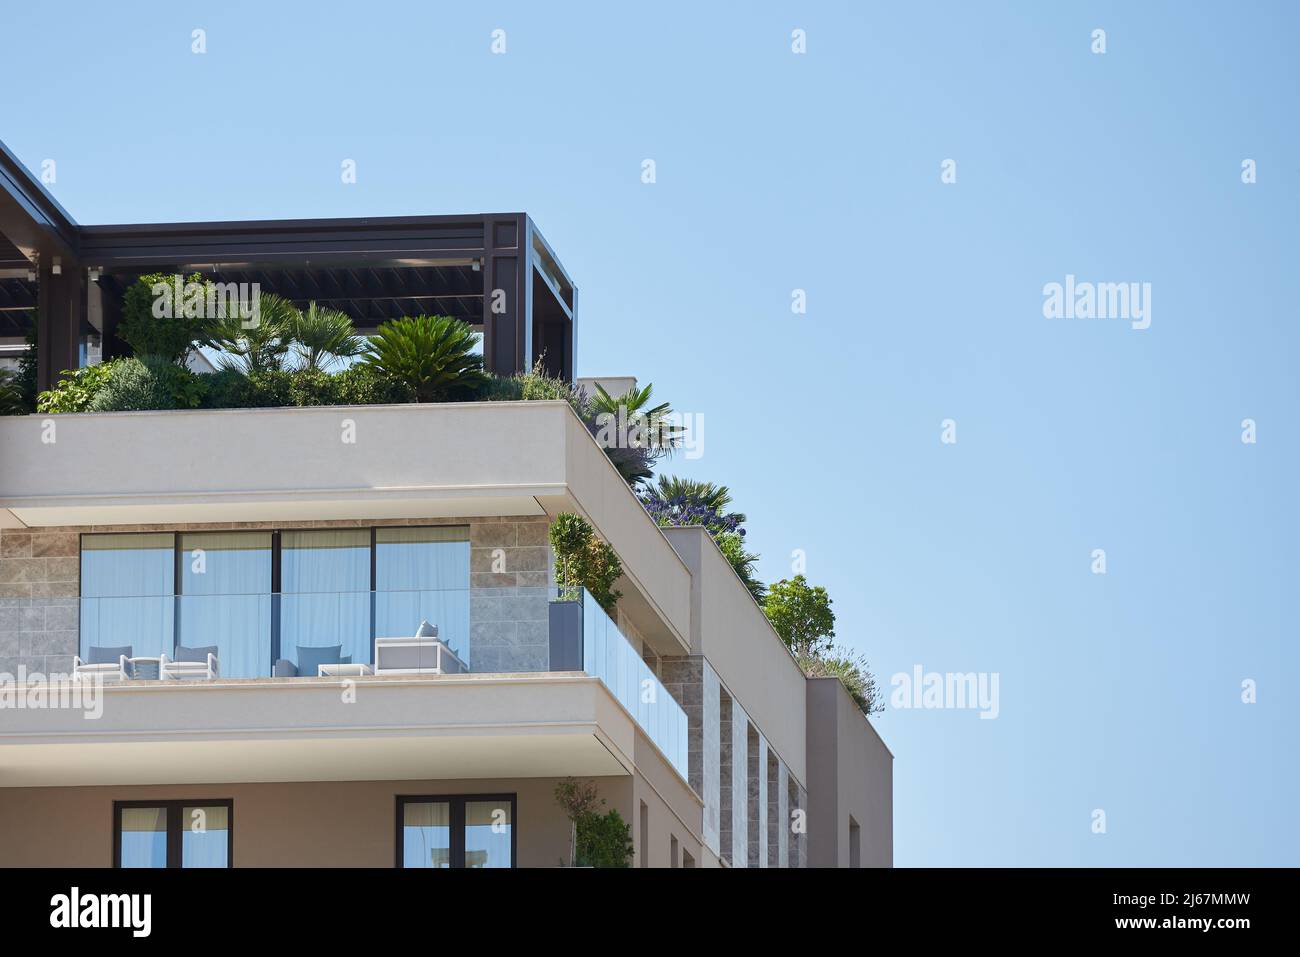 Palms and plants on the rooftop patio in Europe Stock Photo